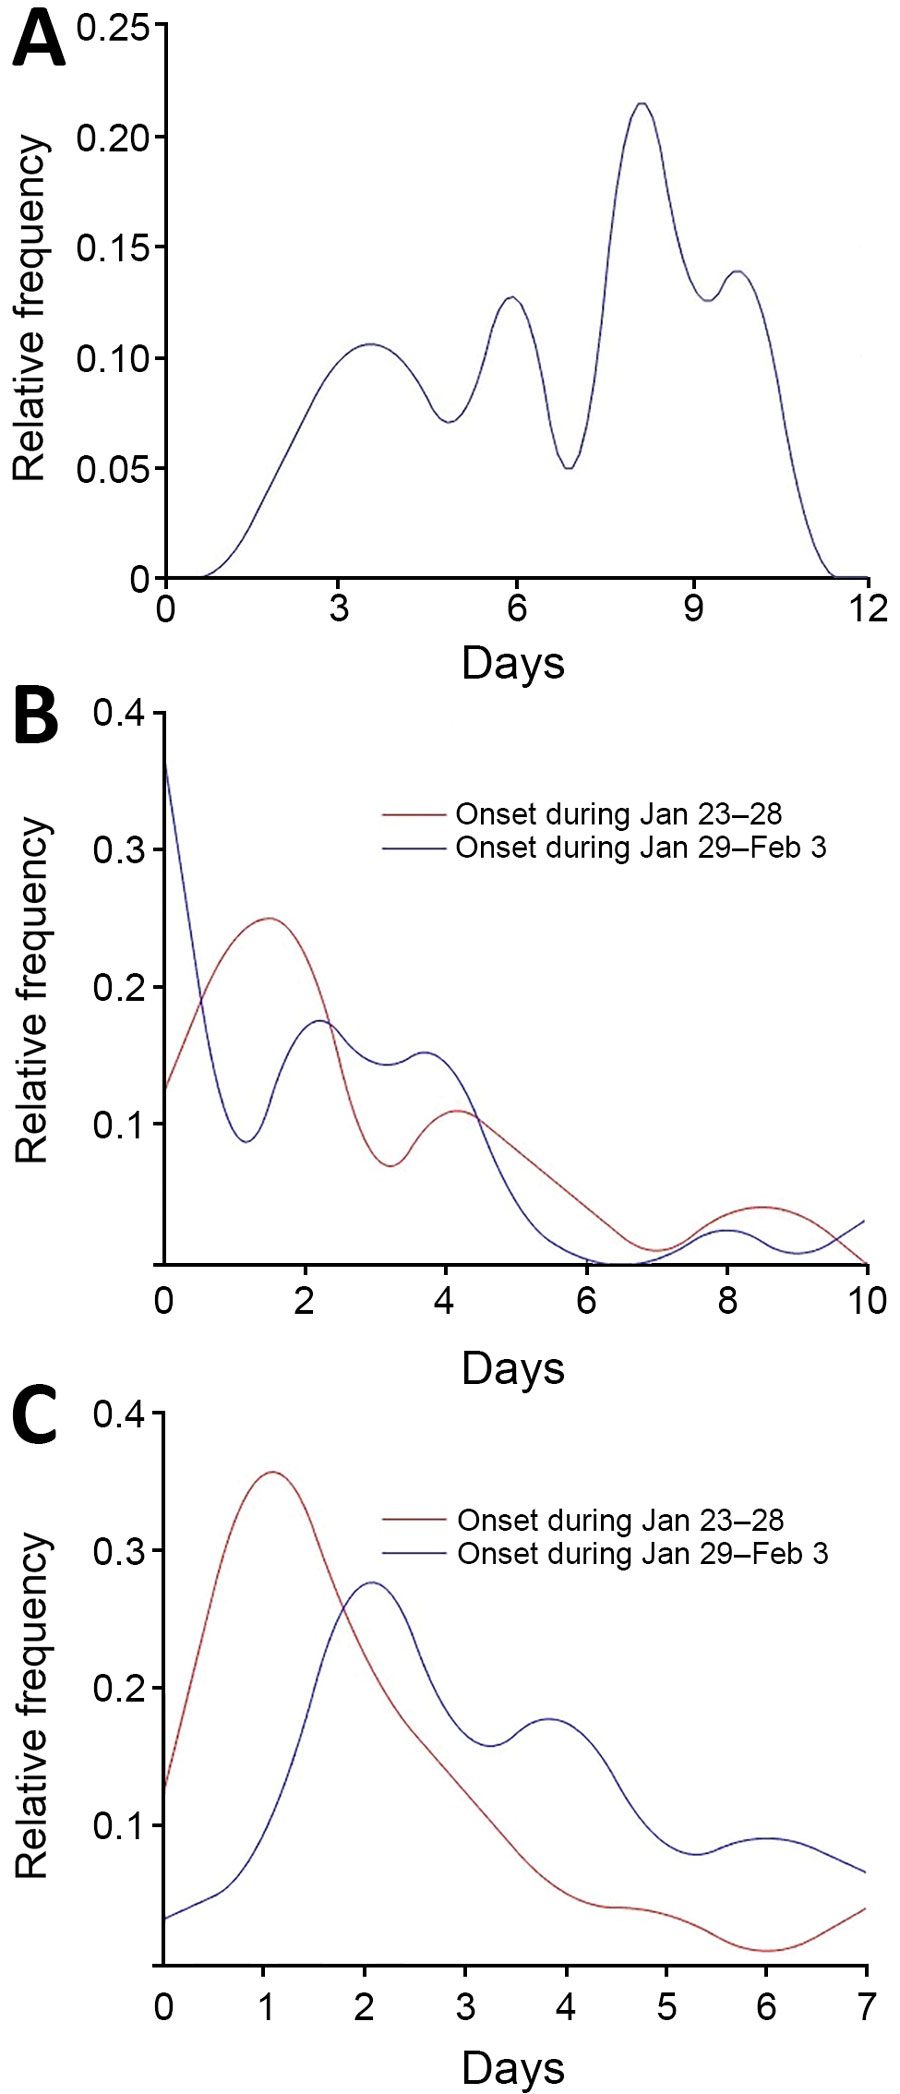 Key time-to-event distributions of 2019 novel coronavirus disease casew in Gansu Province, China, 2020. A) Incubation period (i.e., days from infection to illness onset). B) Days from illness to first medical visit. C) Days from illness to hospitalization.